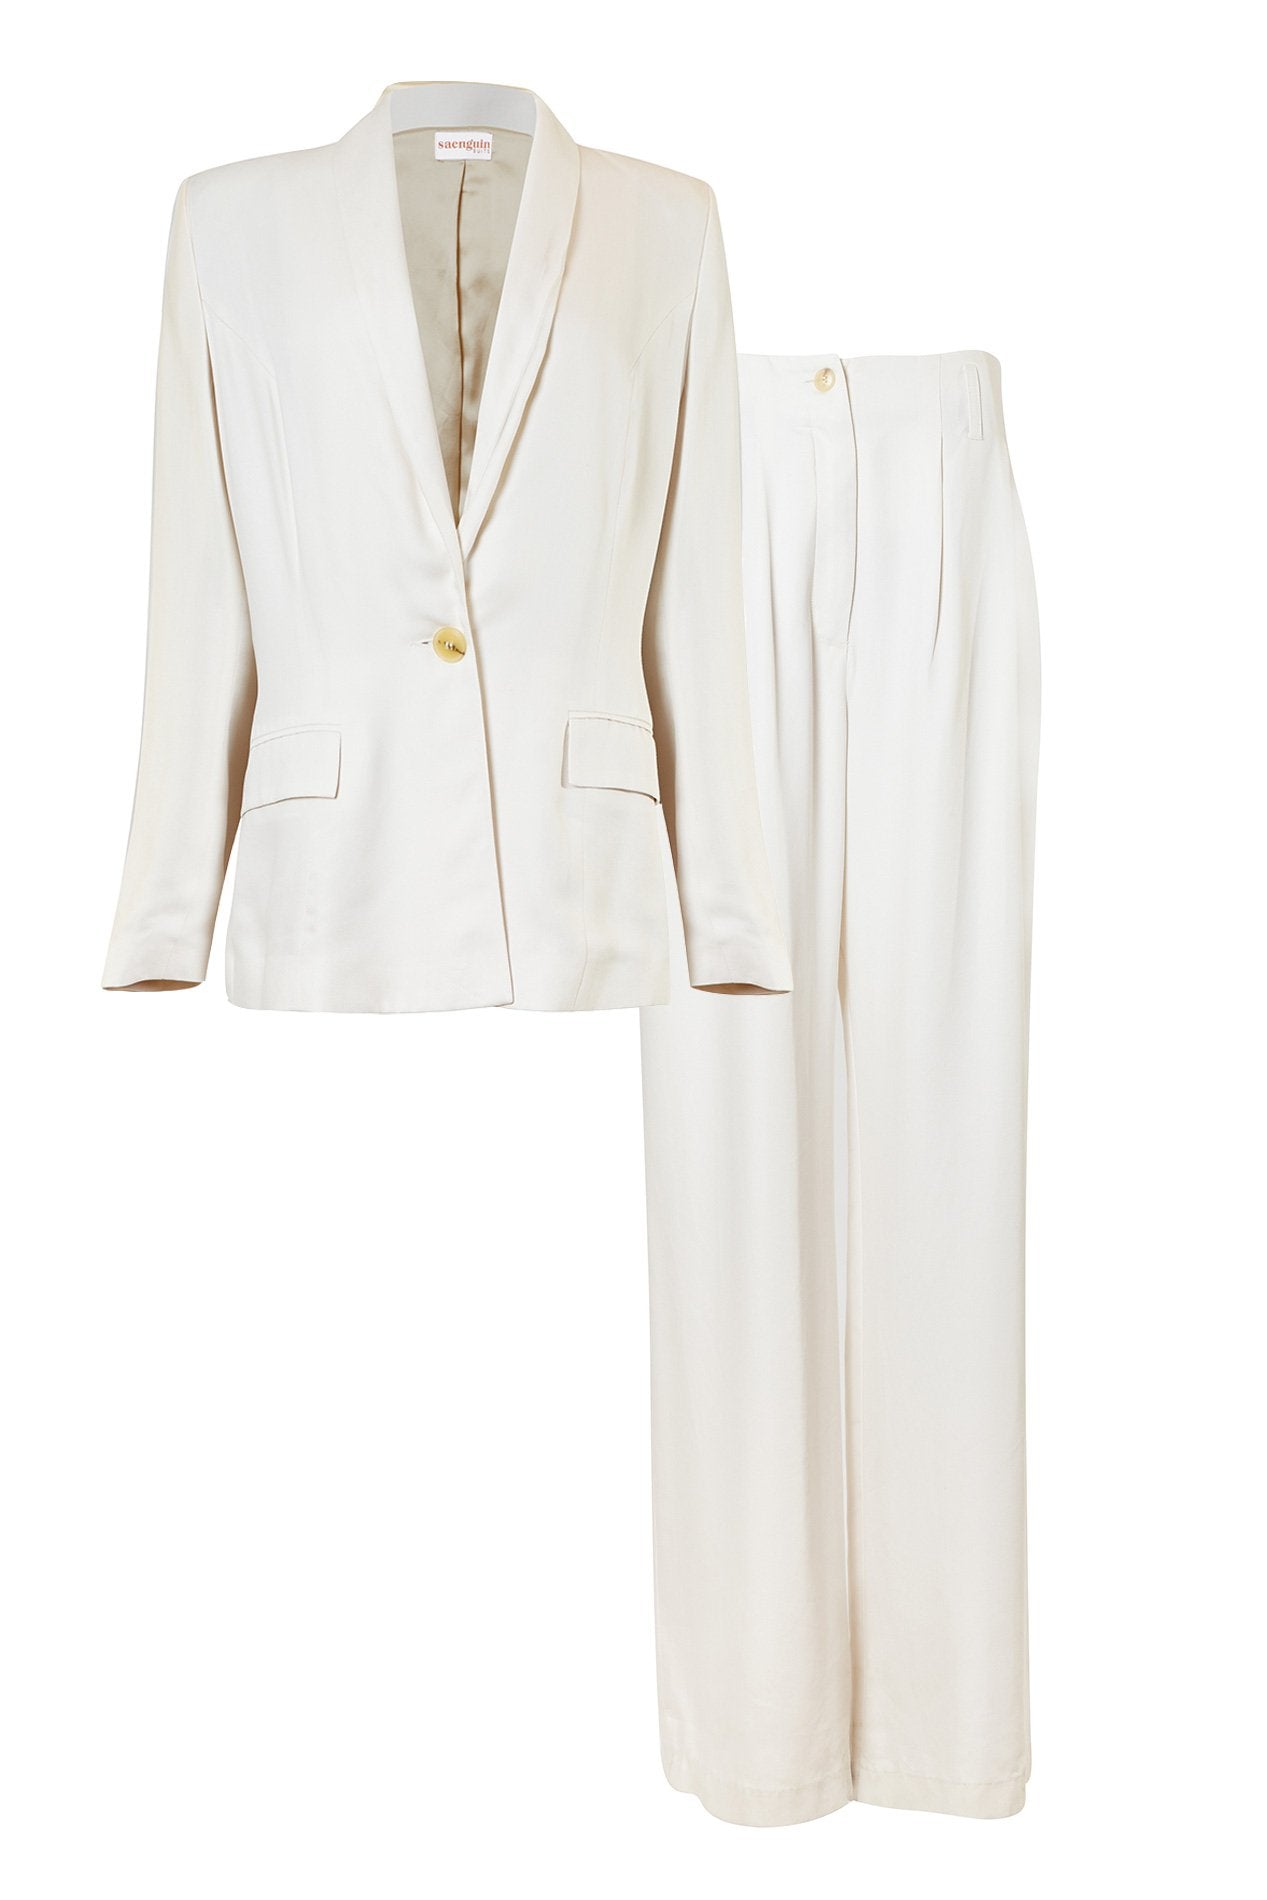 The white suit - limited edition